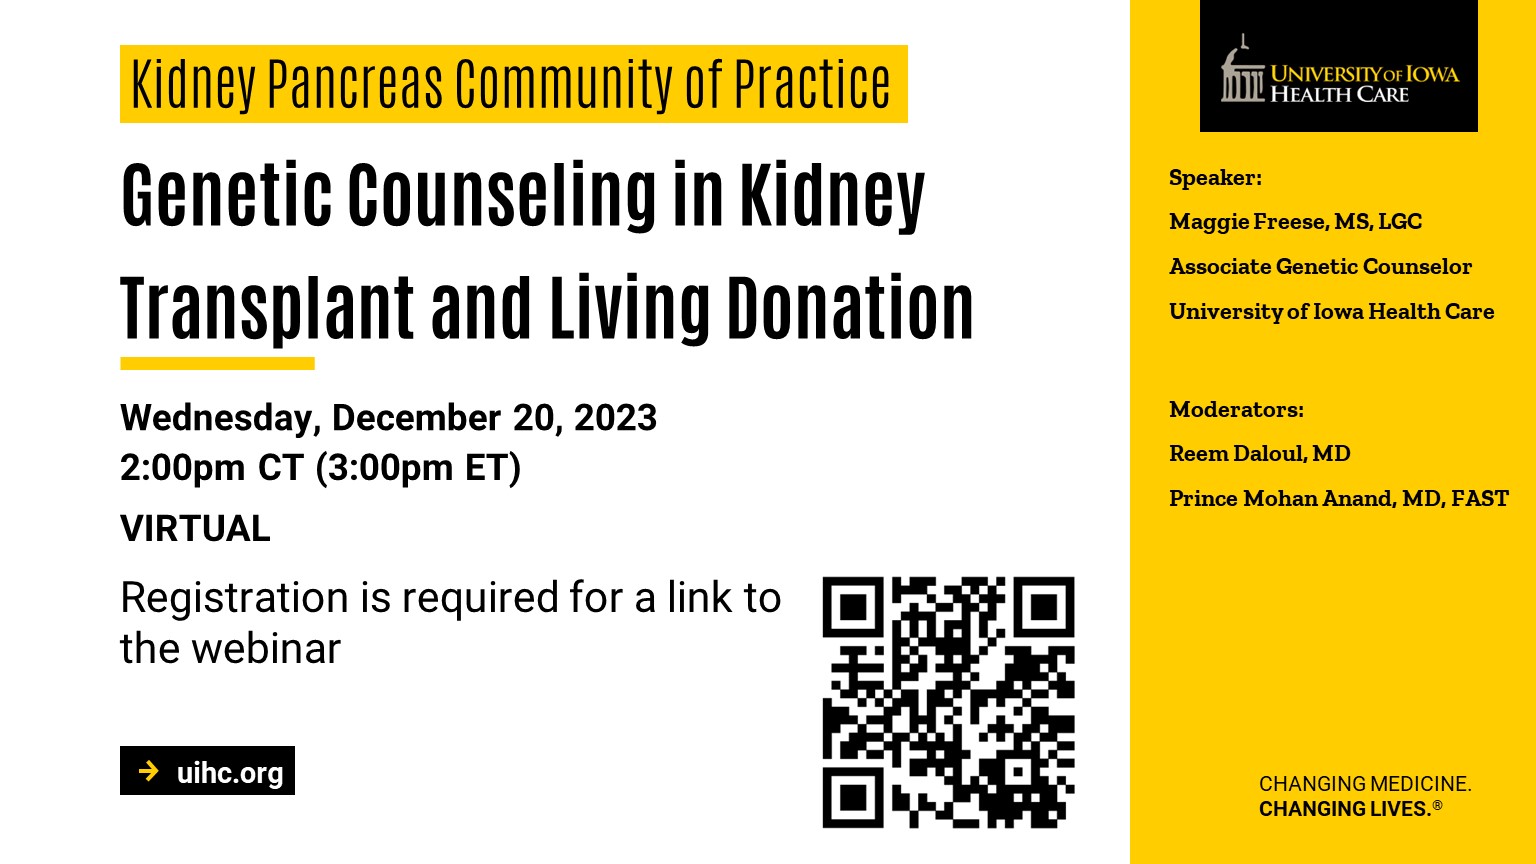 Genetic Counseling in Kidney Transplant and Living Donation